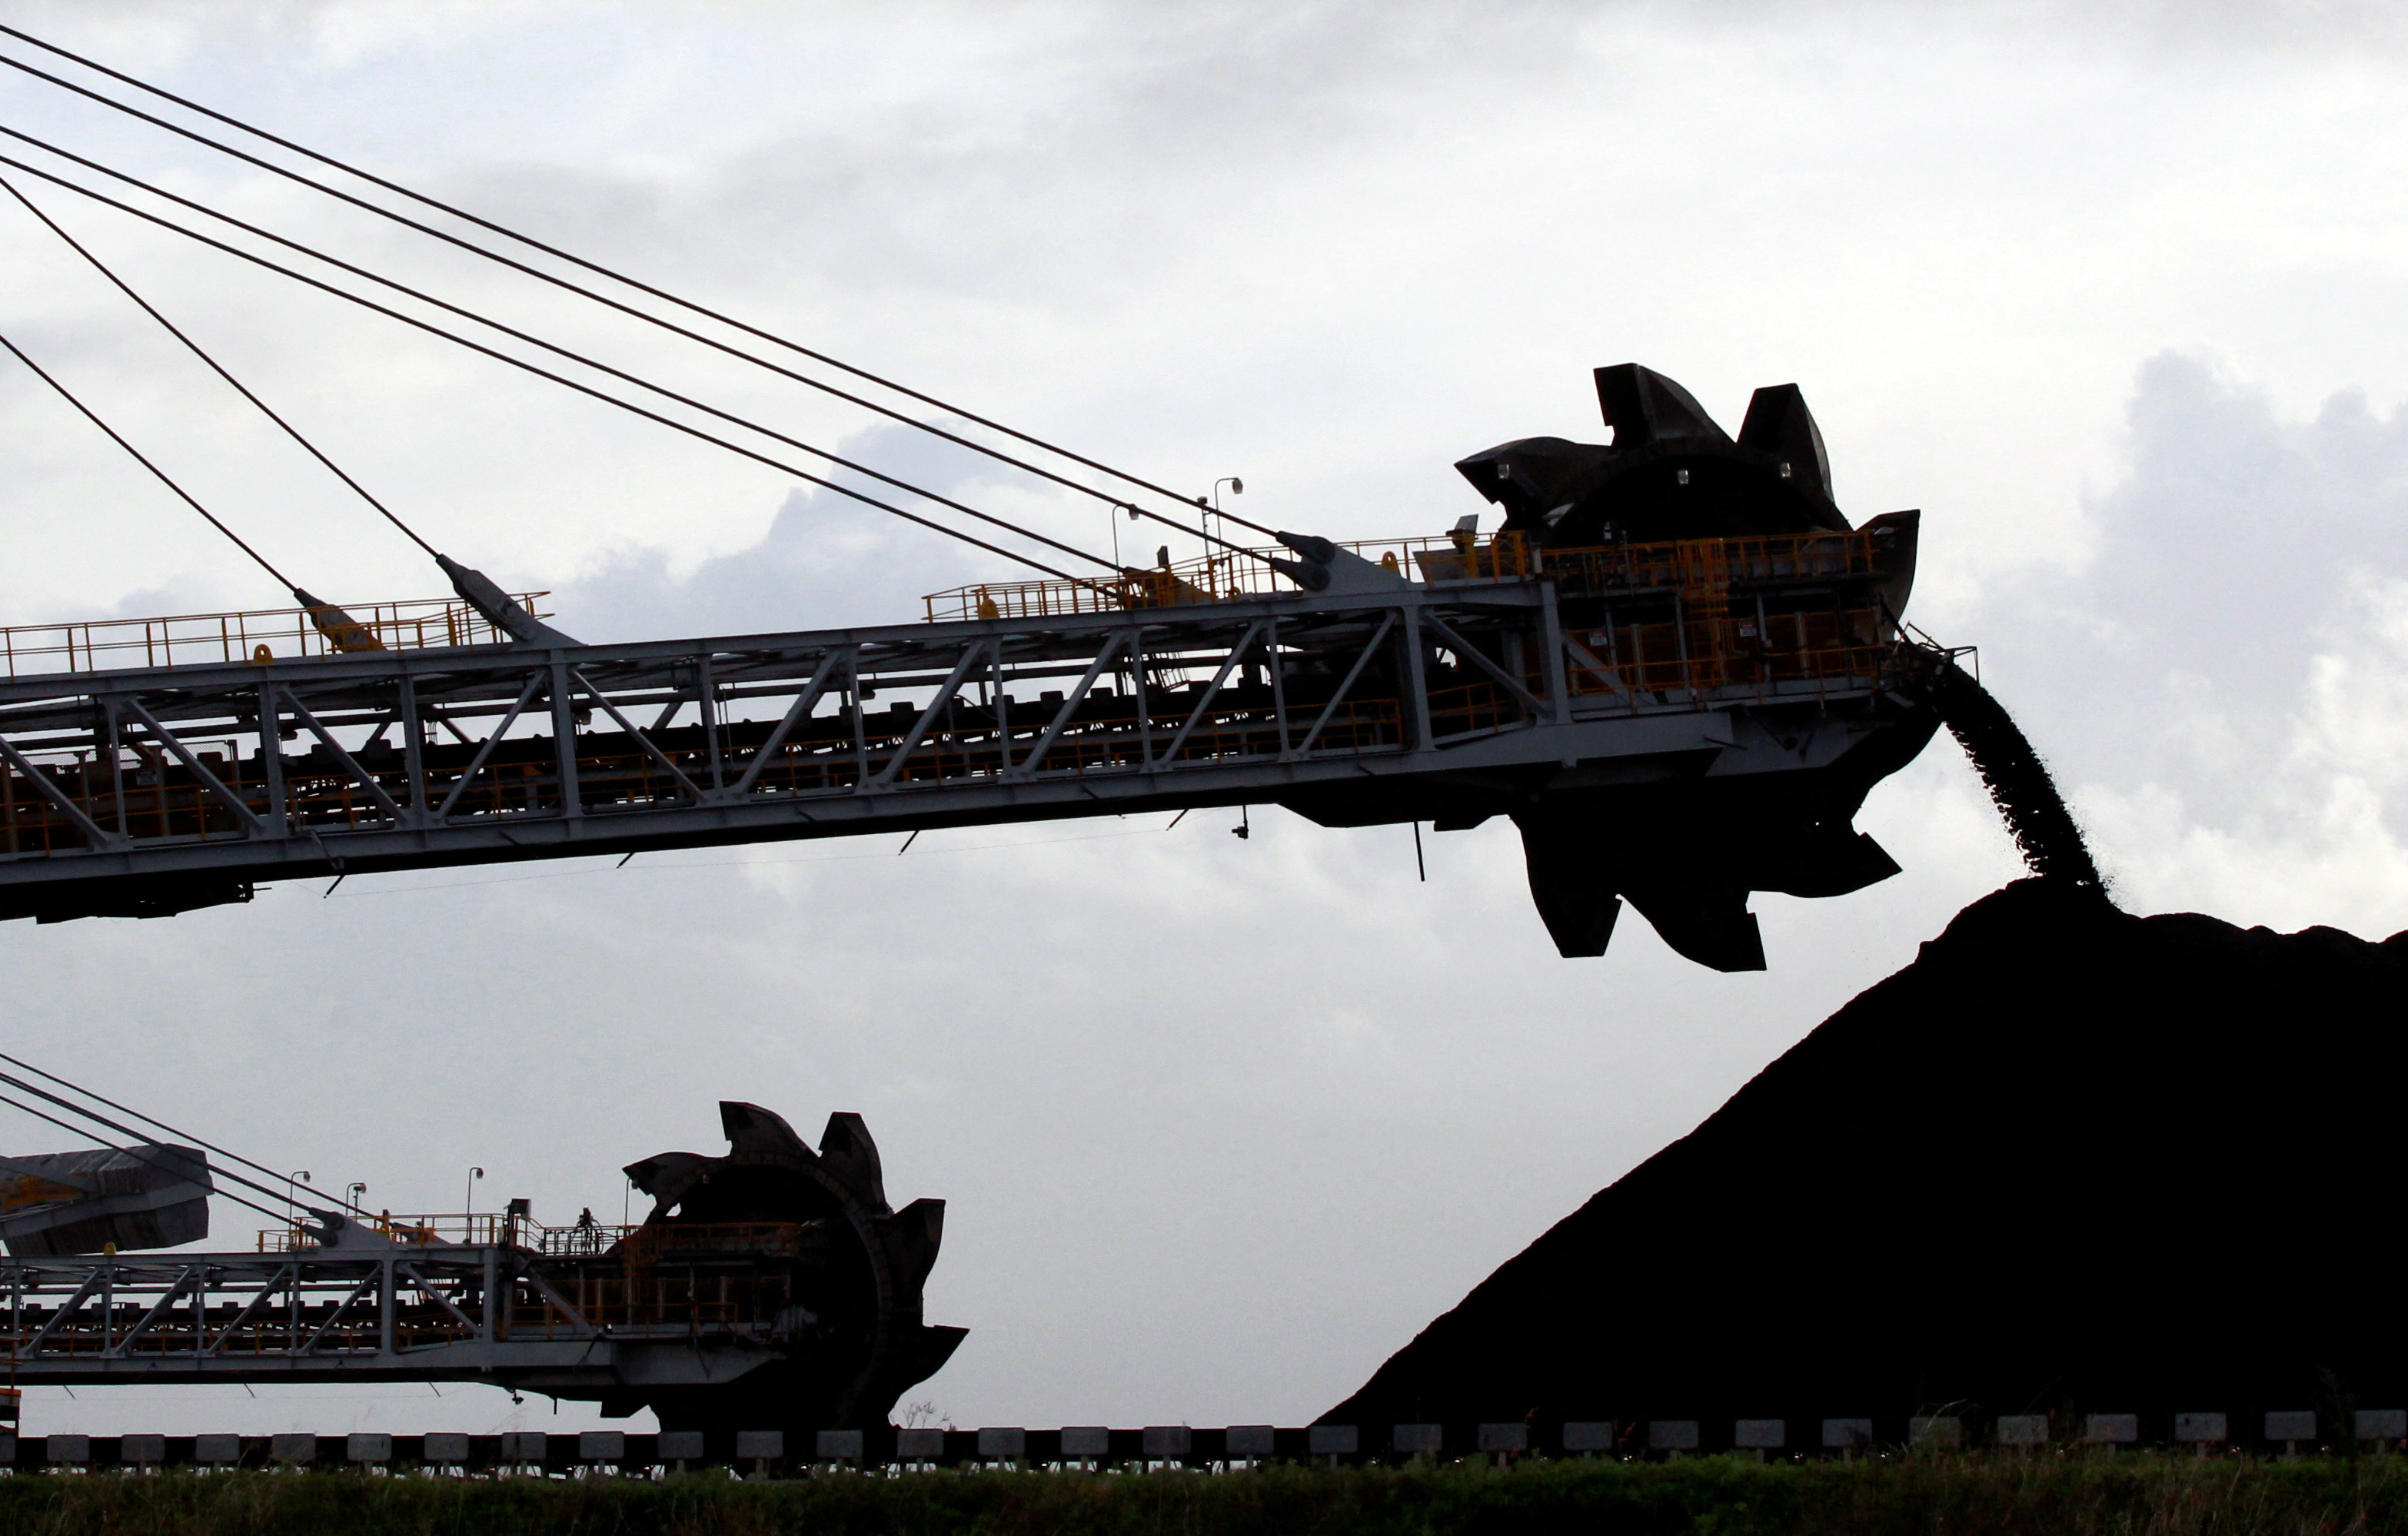 A stacker/reclaimer places coal in stockpiles at the port in Newcastle, Australia